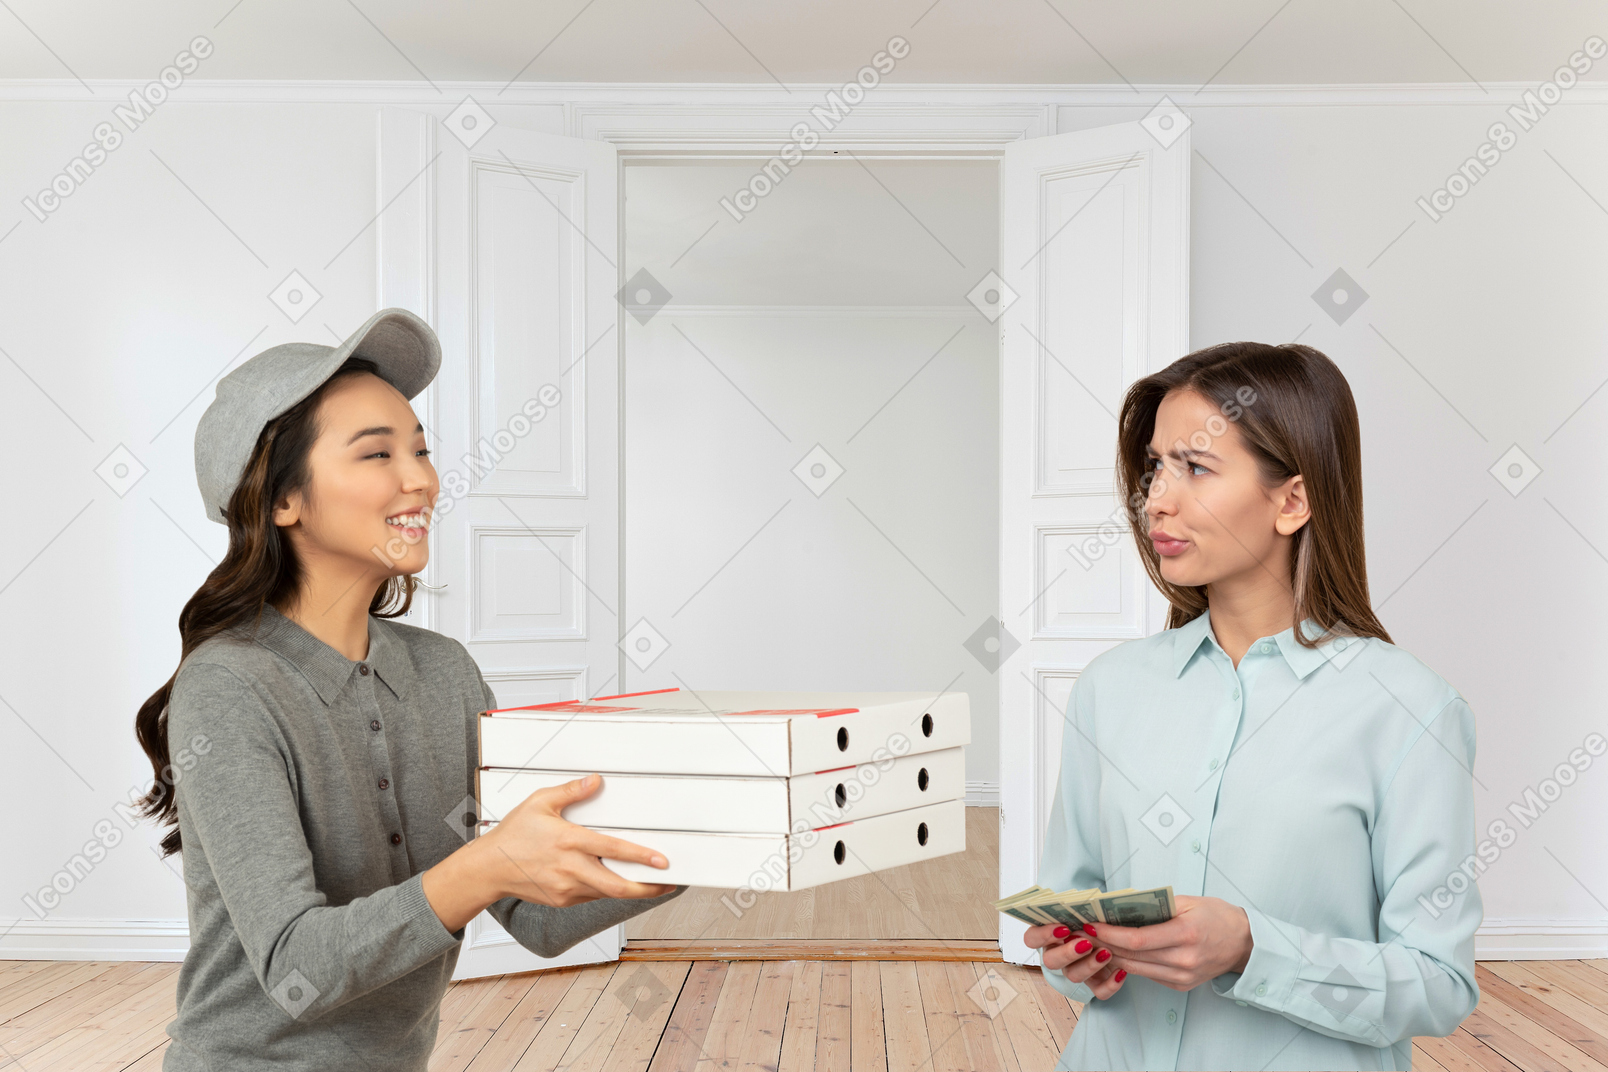 A woman paying for a pizza delivery